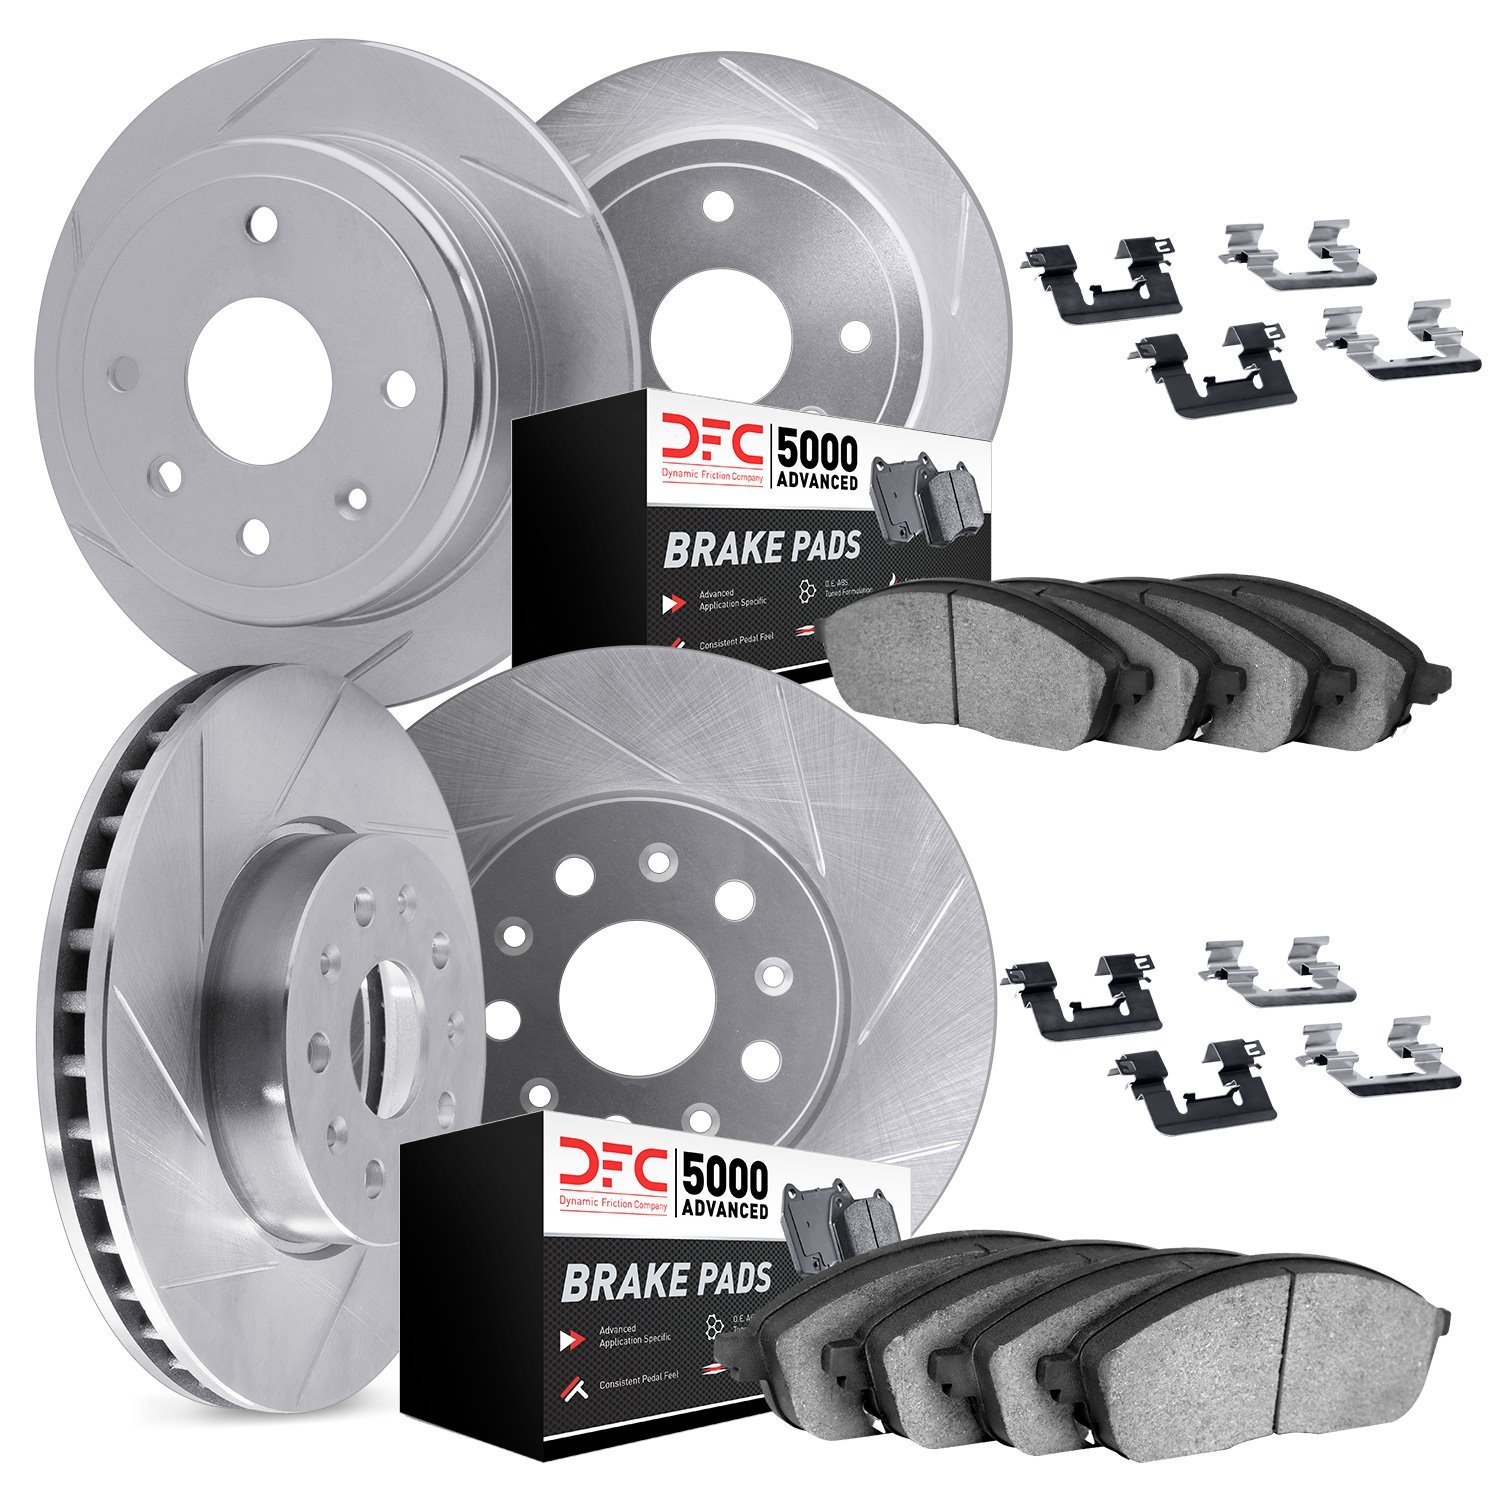 5514-59070 Slotted Brake Rotors w/5000 Advanced Brake Pads Kit & Hardware [Silver], 2006-2014 Acura/Honda, Position: Front and R